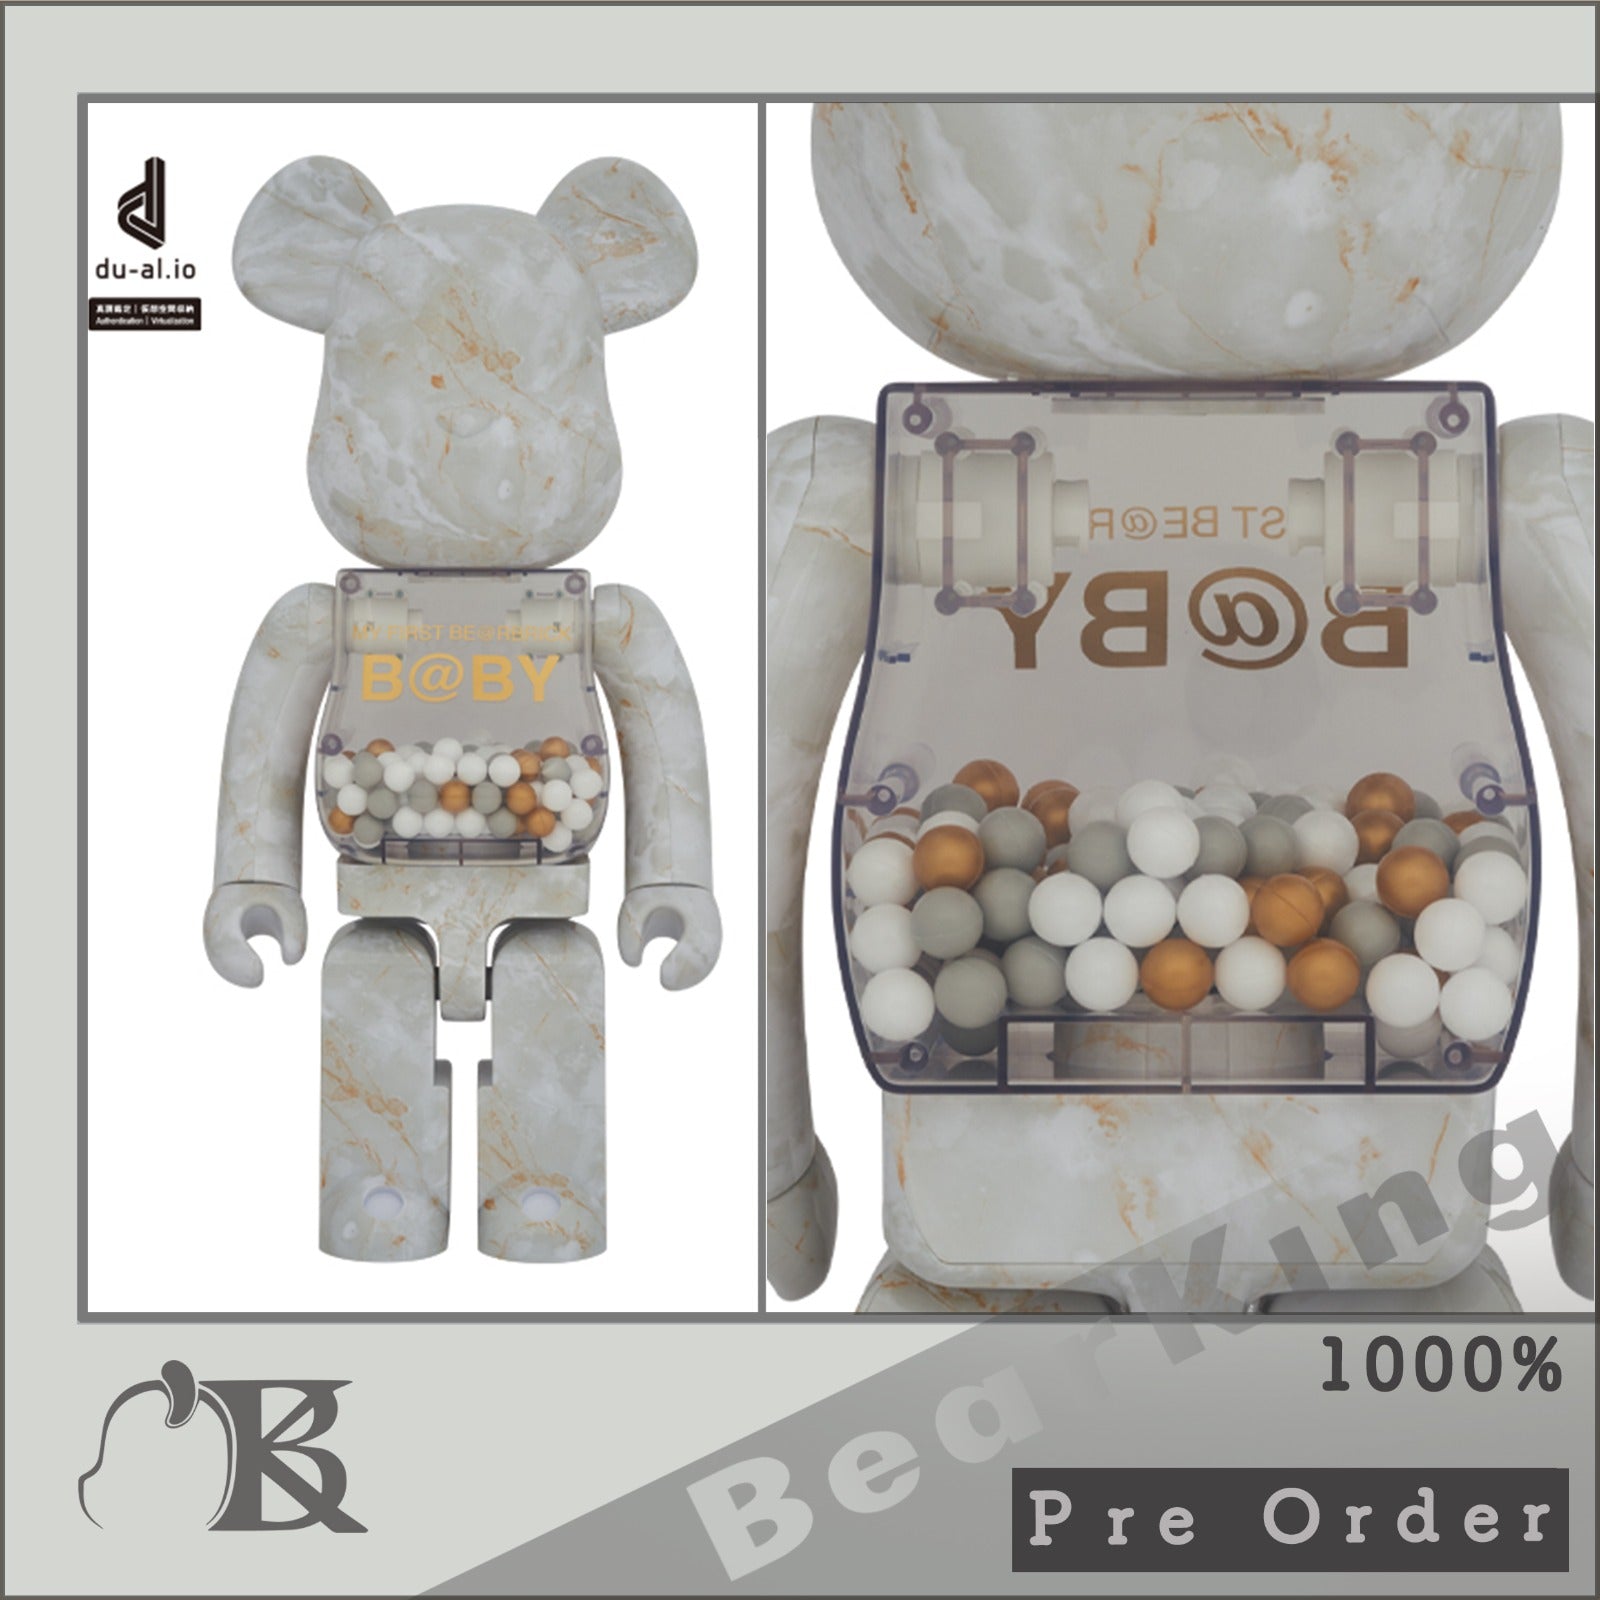 MY FIRST BE@RBRICK B@BY MARBLE 1000%エンタメ/ホビー